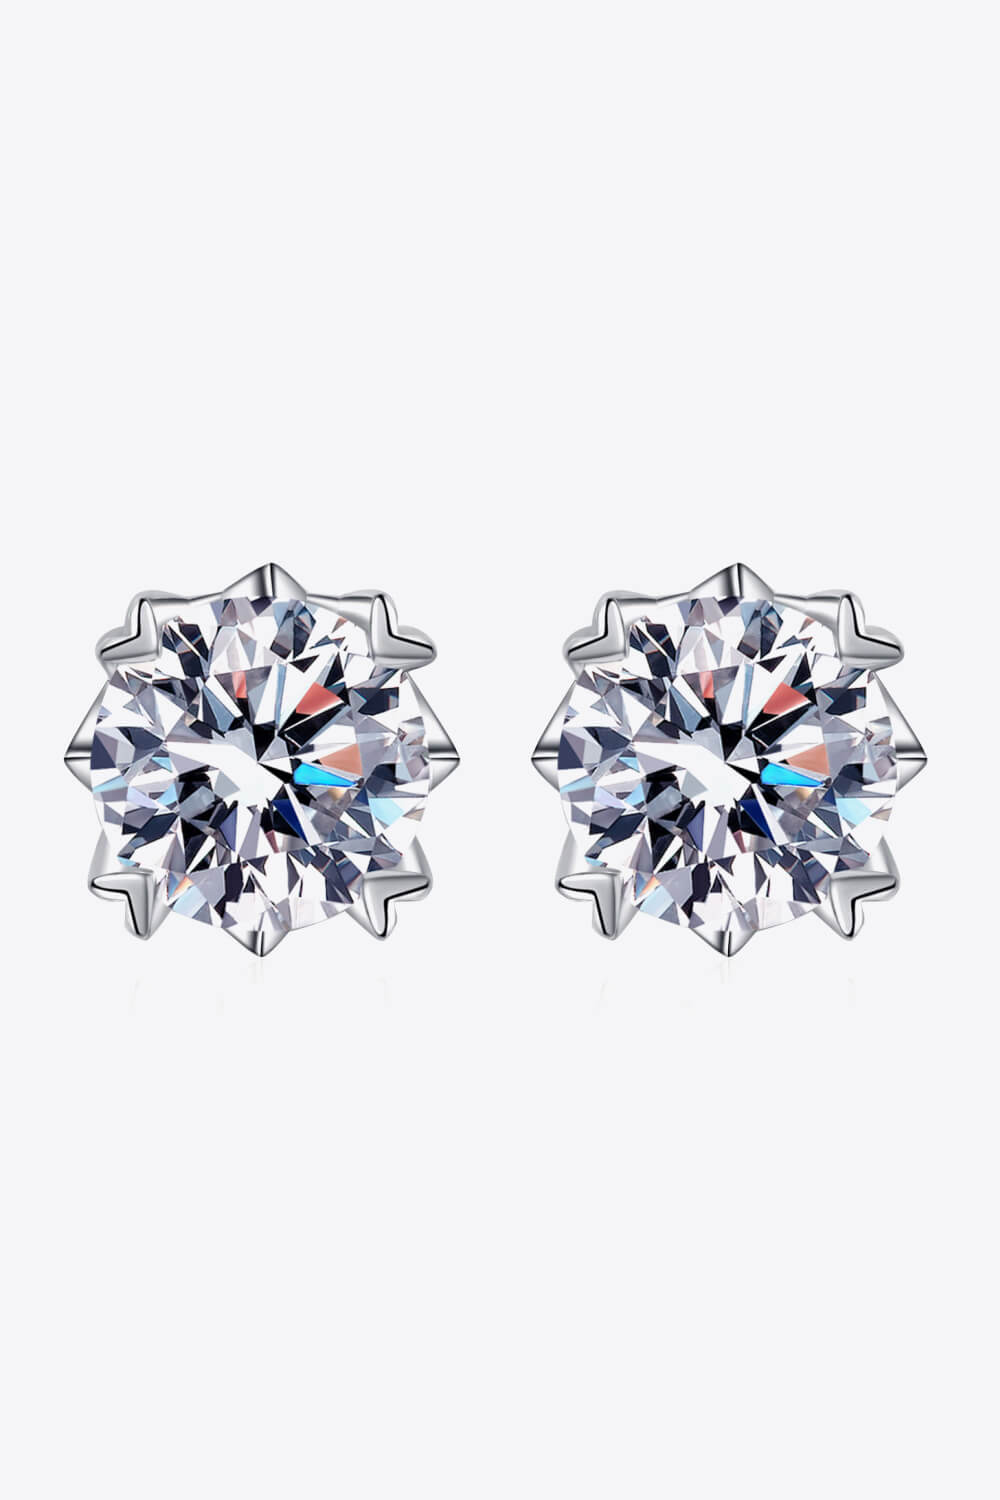 925 Sterling Silver 4 Carat Moissanite Stud Earrings-Earrings-Inspired by Justeen-Women's Clothing Boutique in Chicago, Illinois